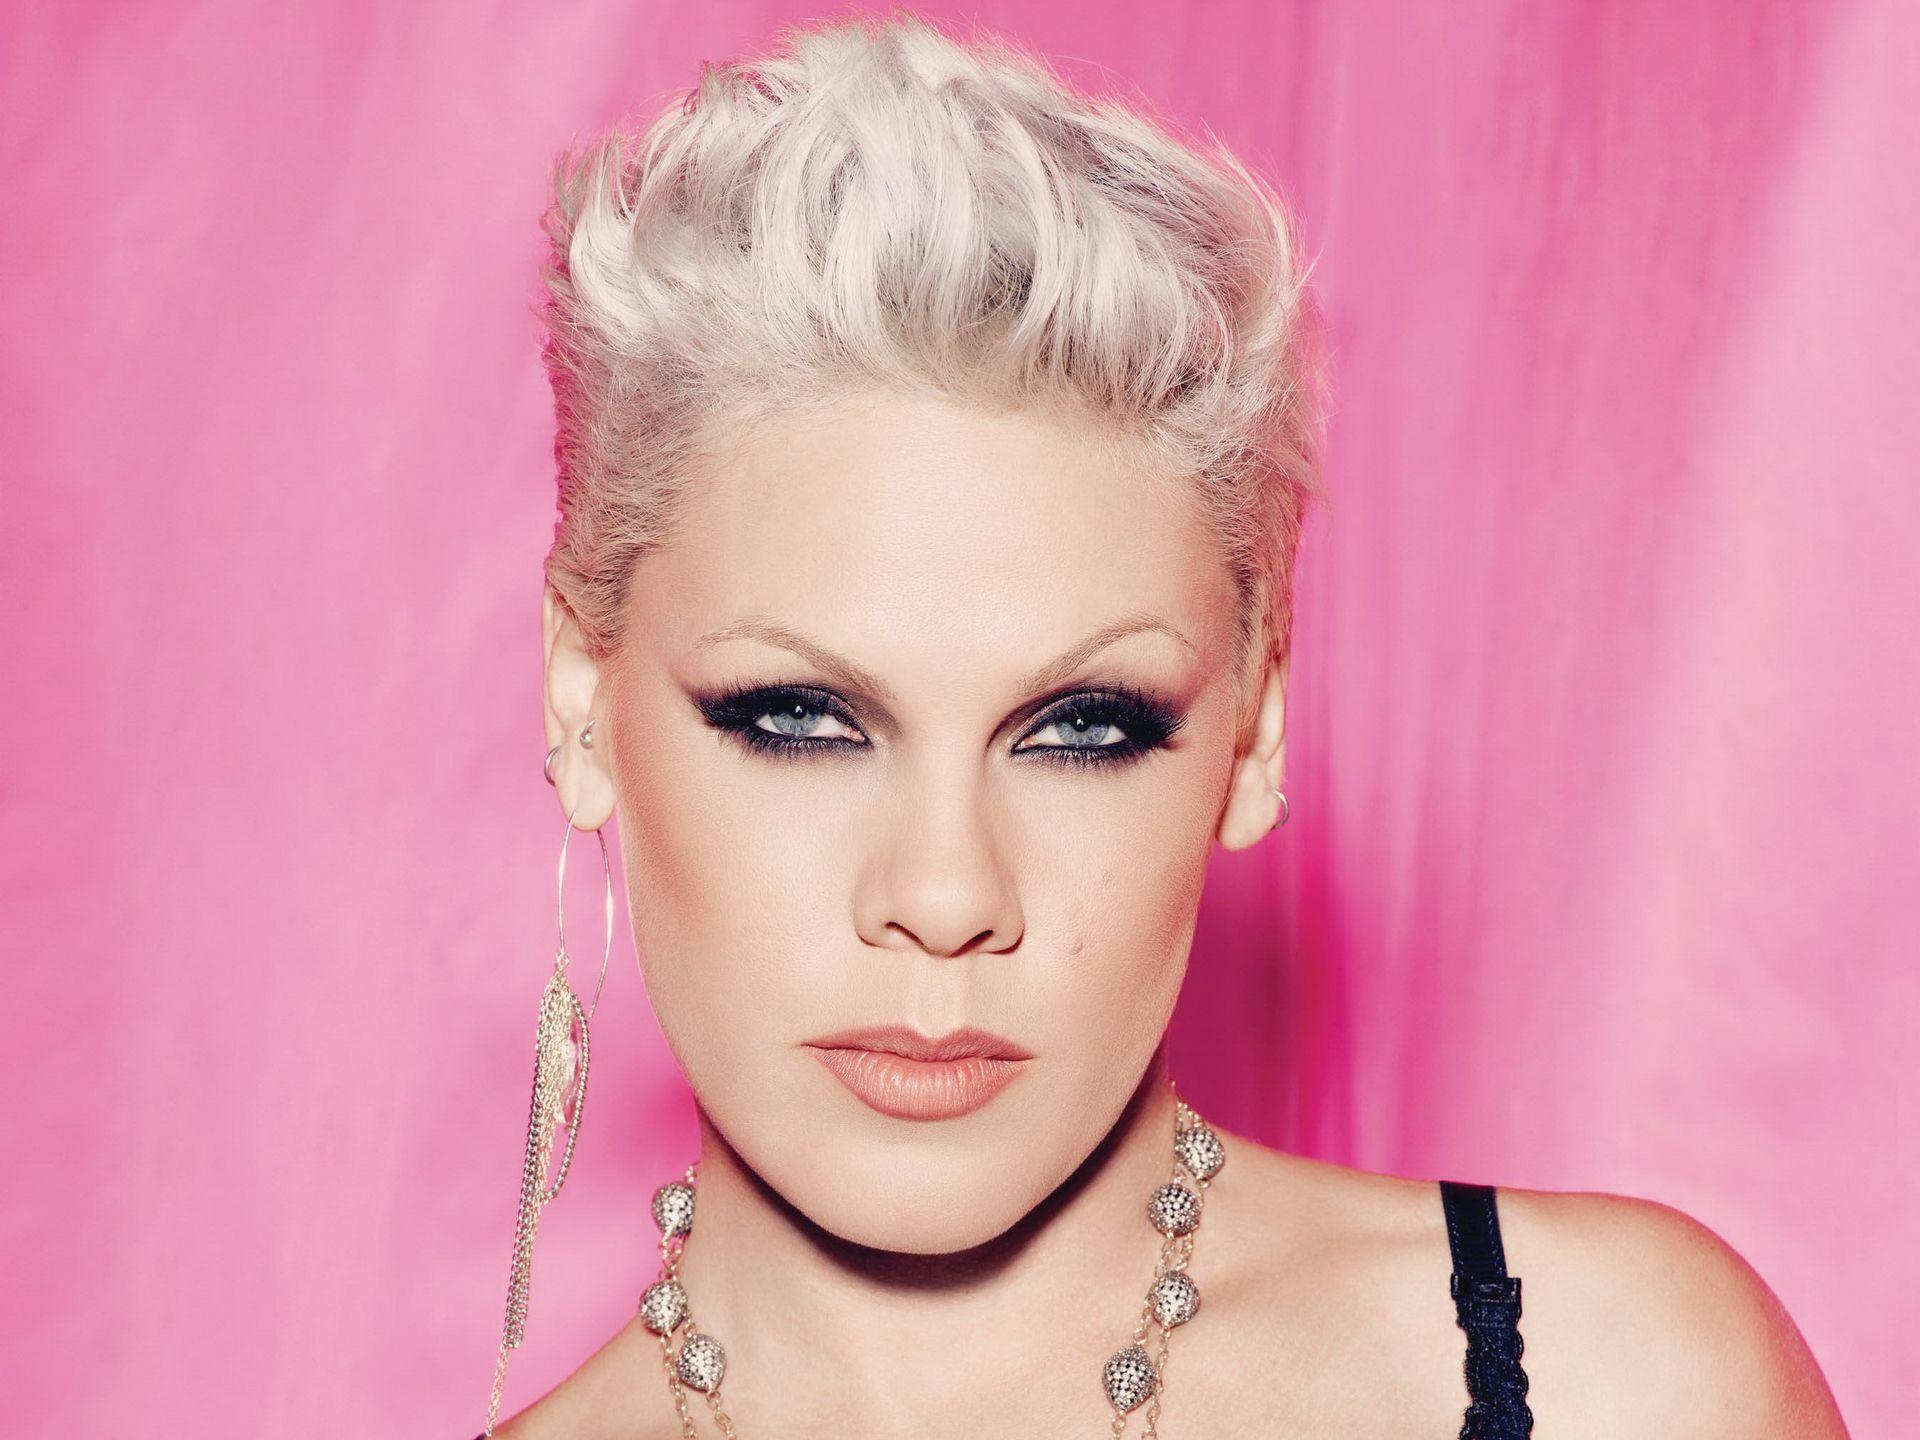 Things You Probably Didn't Know about Pink, People